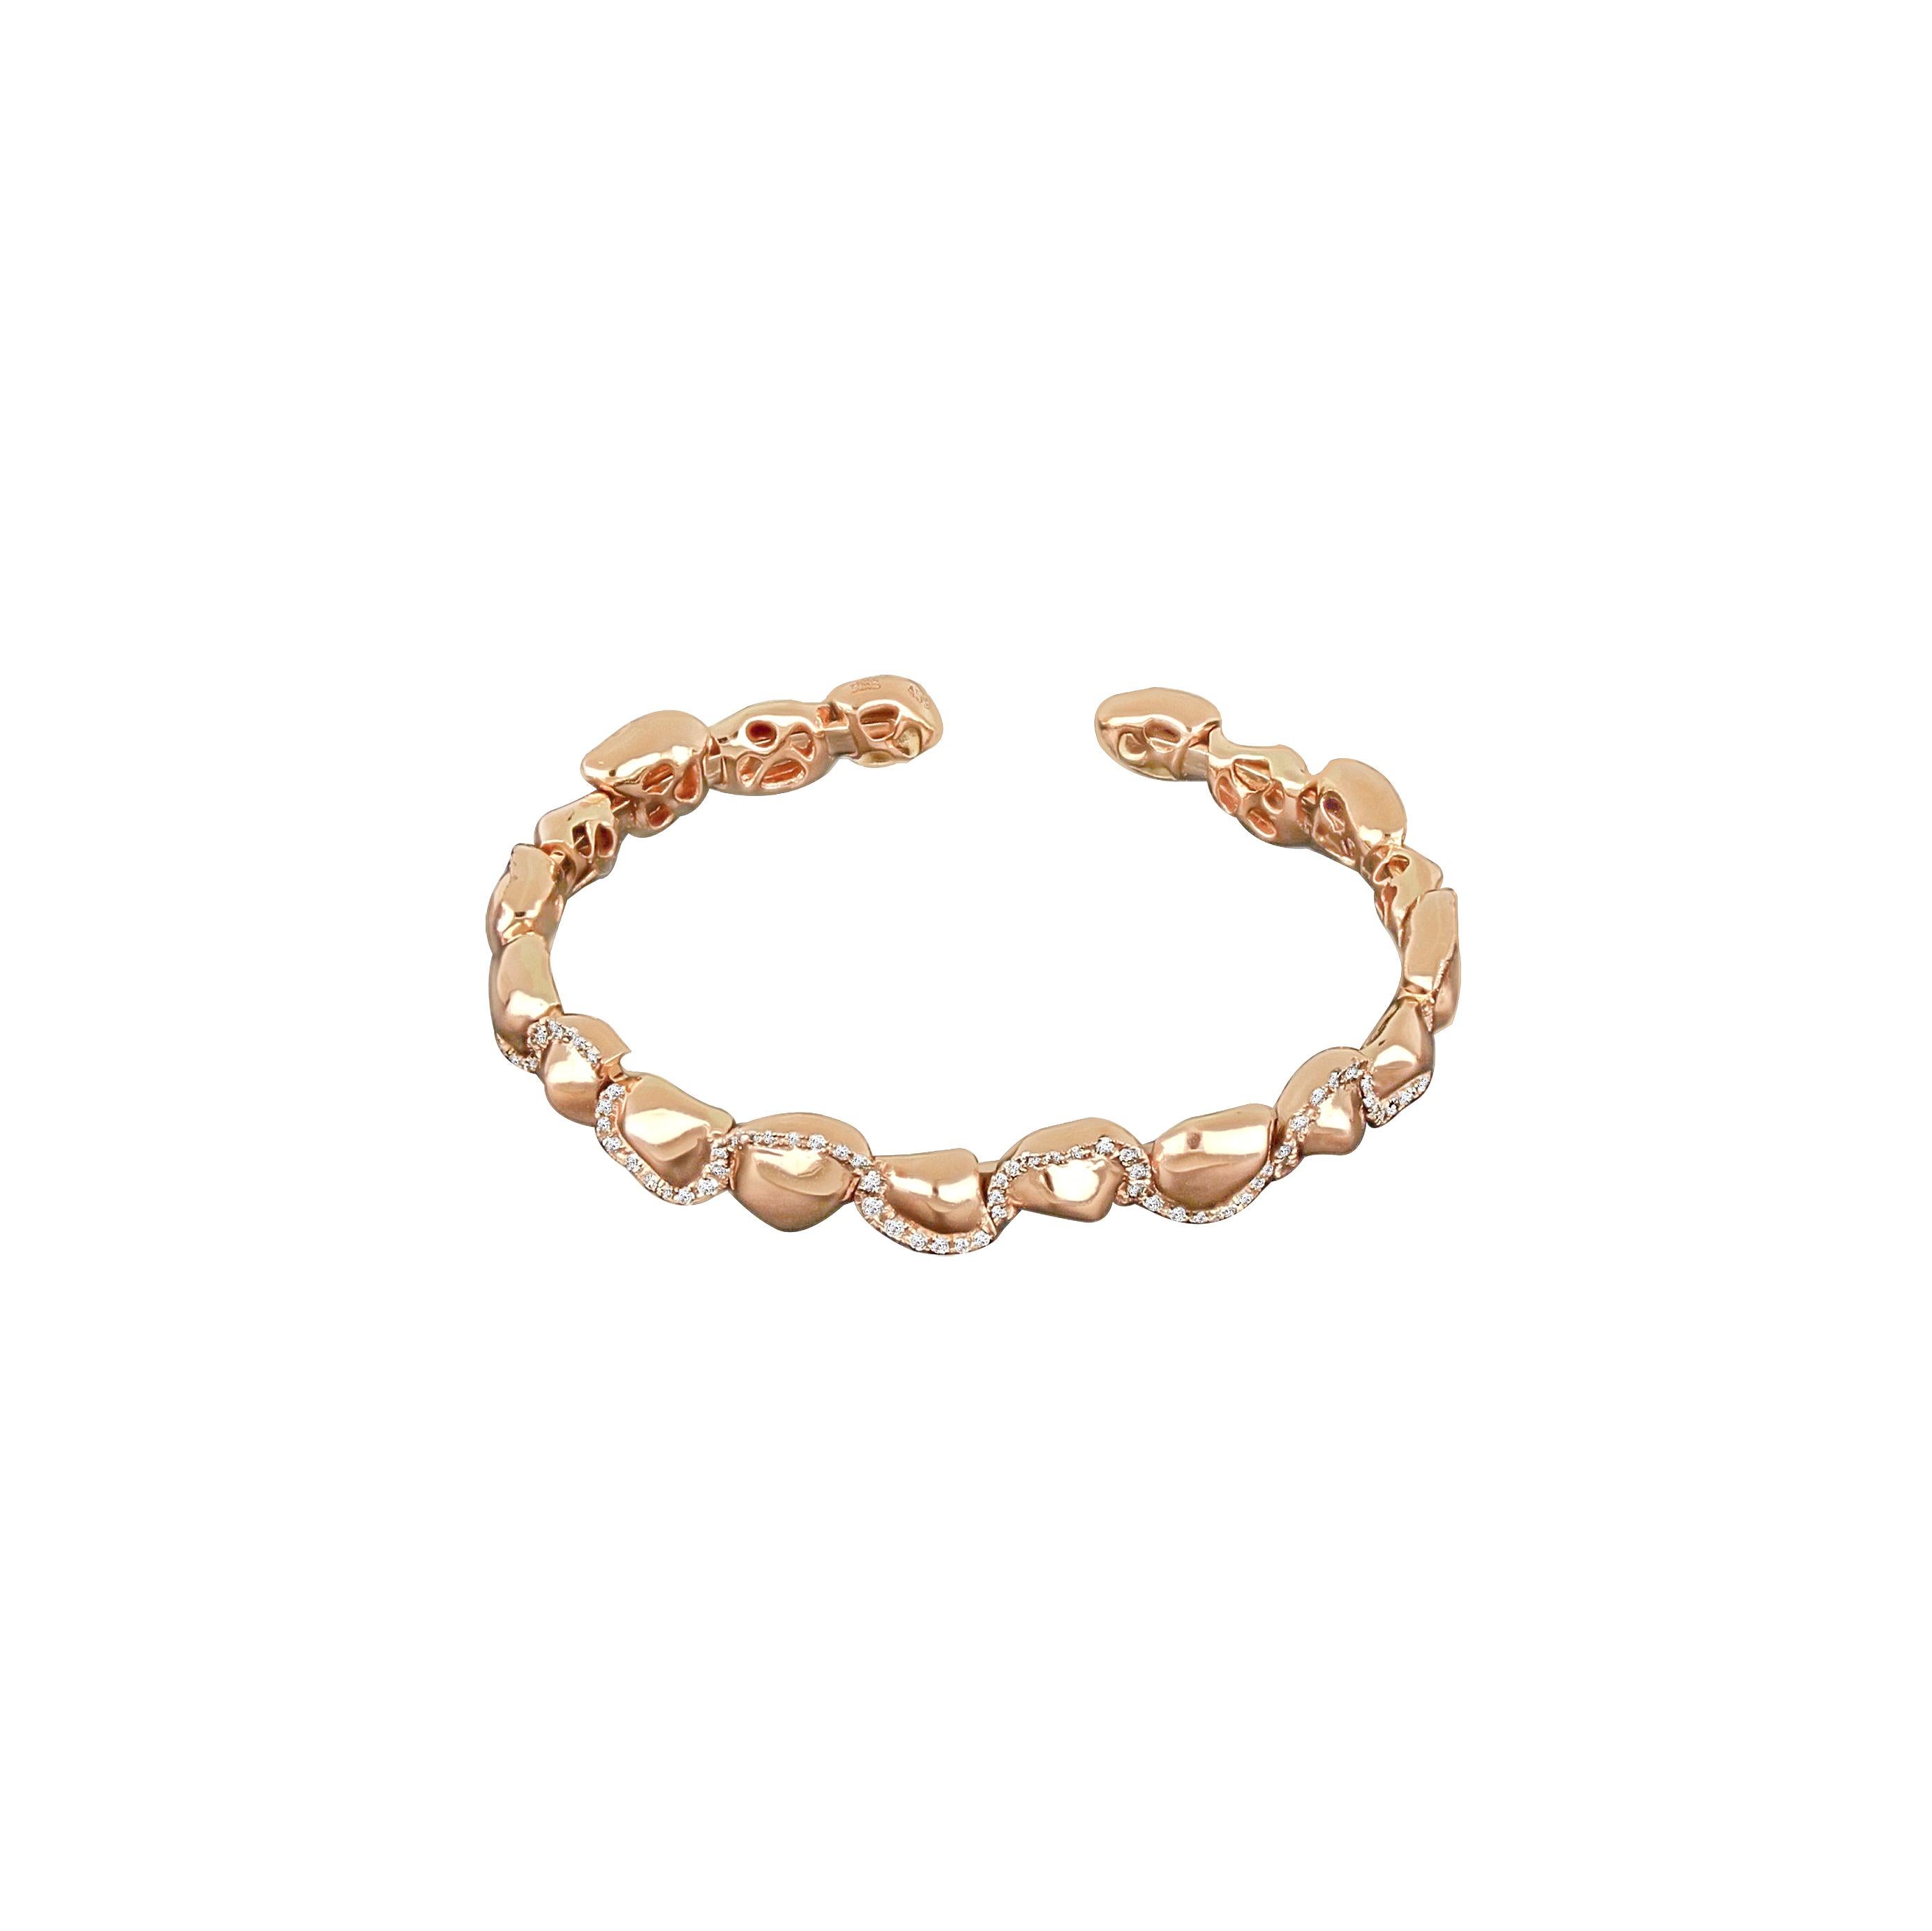 Sarab Collection Bangle takes its shape from the patterns and marking of the desert. Interlacing the finest round cut diamonds and rose gold nuggets to create an echo of the many stories of resilient women of the desert.

-	Weight: 20.86 g